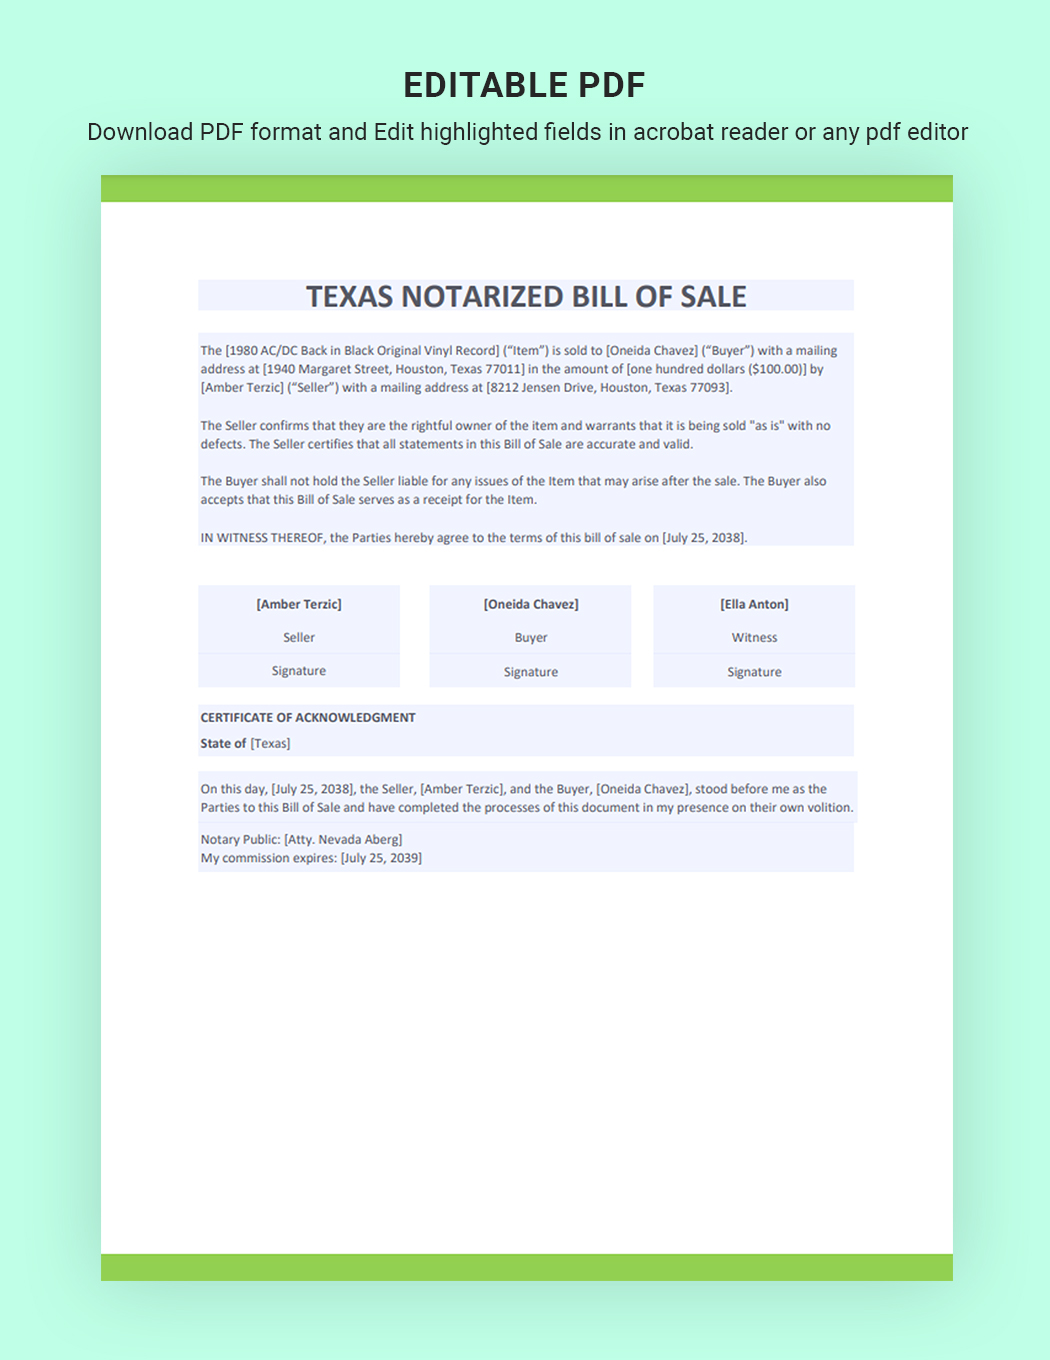 Texas Notarized Bill of Sale Template